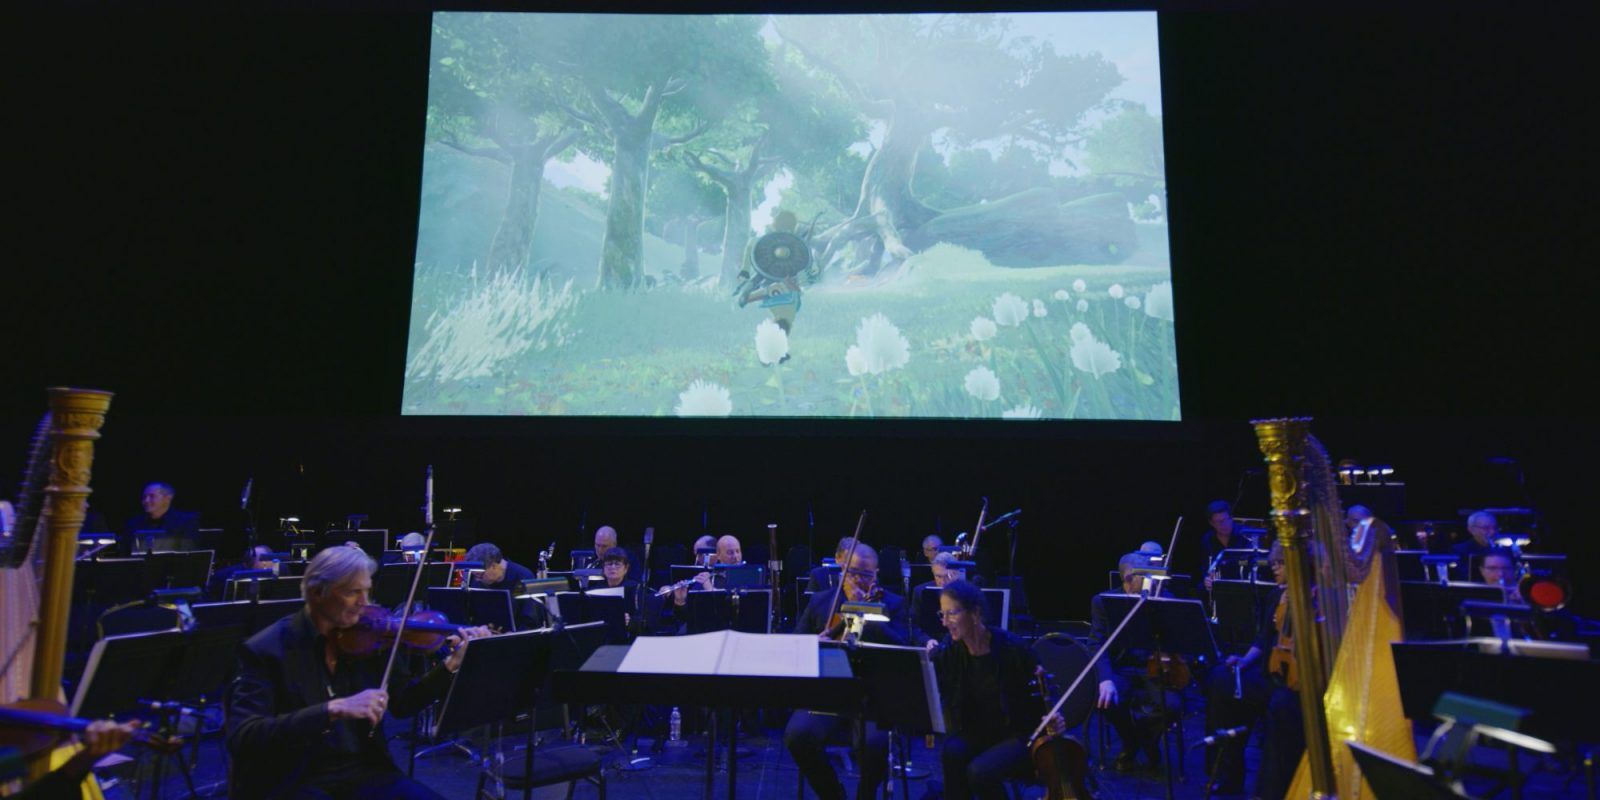 Zelda orchestra with screen